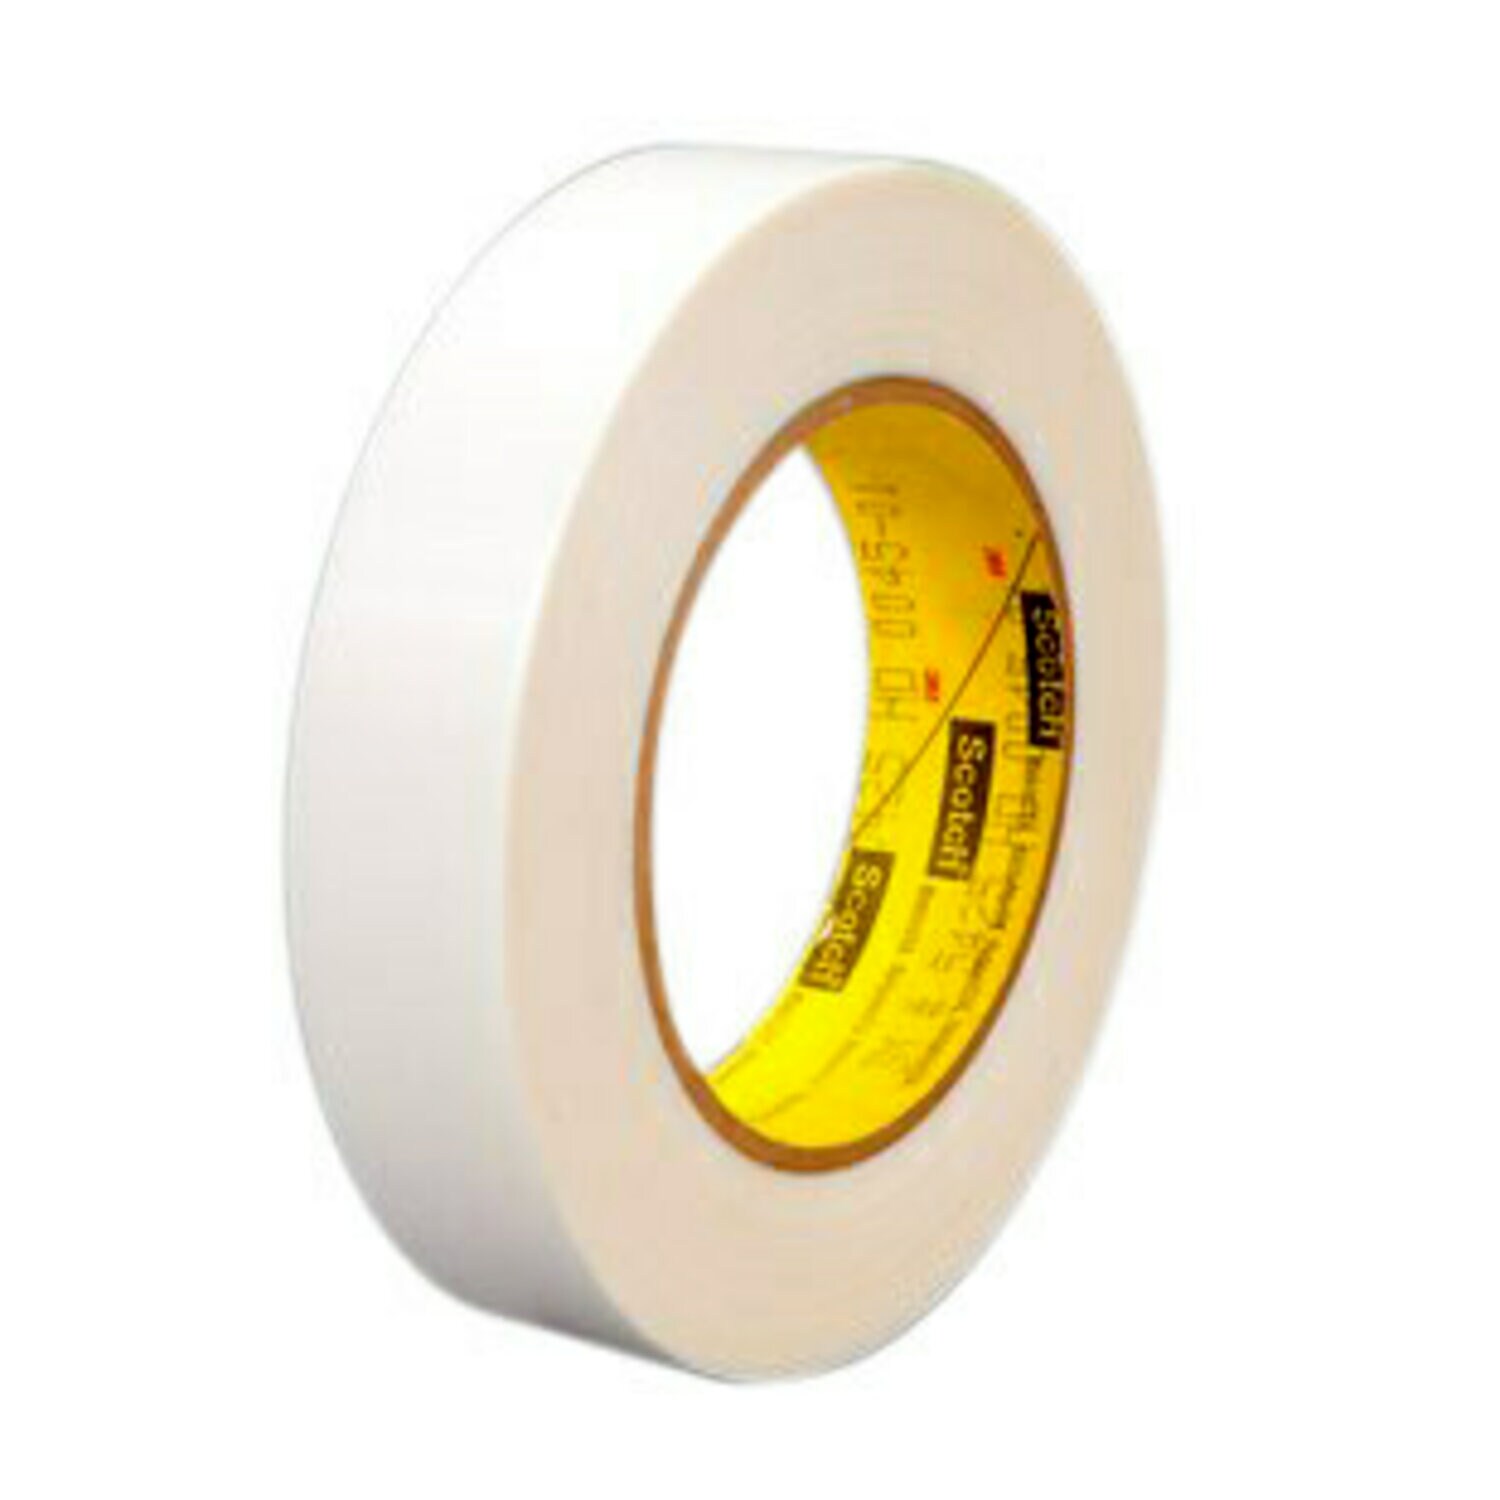 7010334812 - 3M UHMW Film Tape 5425, Transparent, 24 in x 36 yd, 5.1 mil, 1 roll per
case, Untrimmed Potted